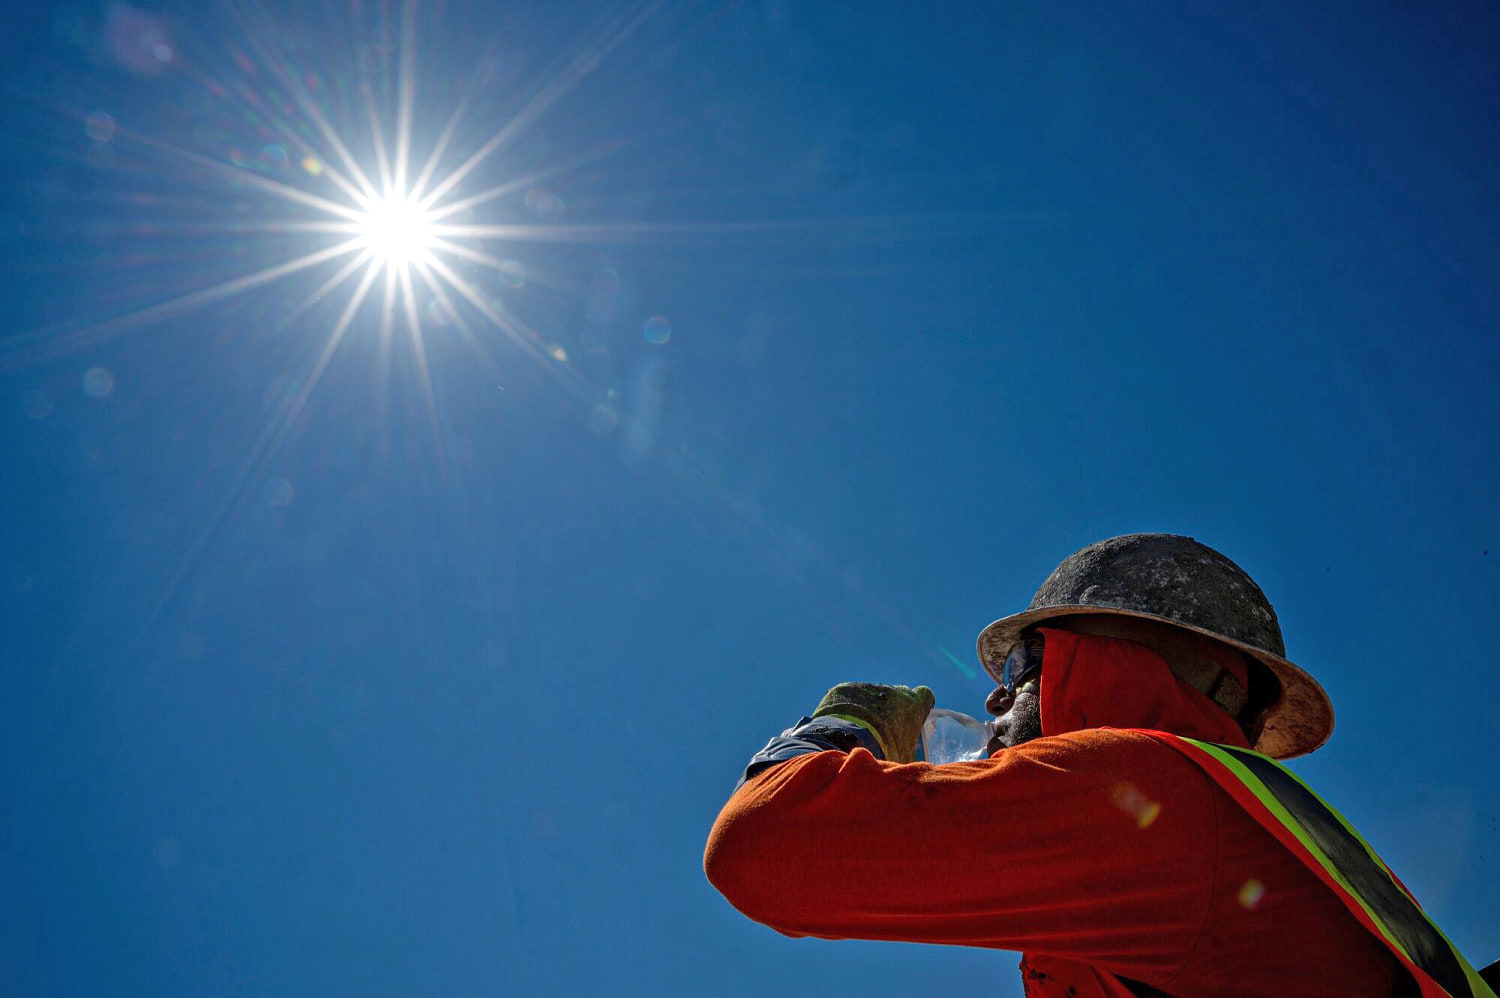 Health risks linked to extreme heat linger even as temperatures drop